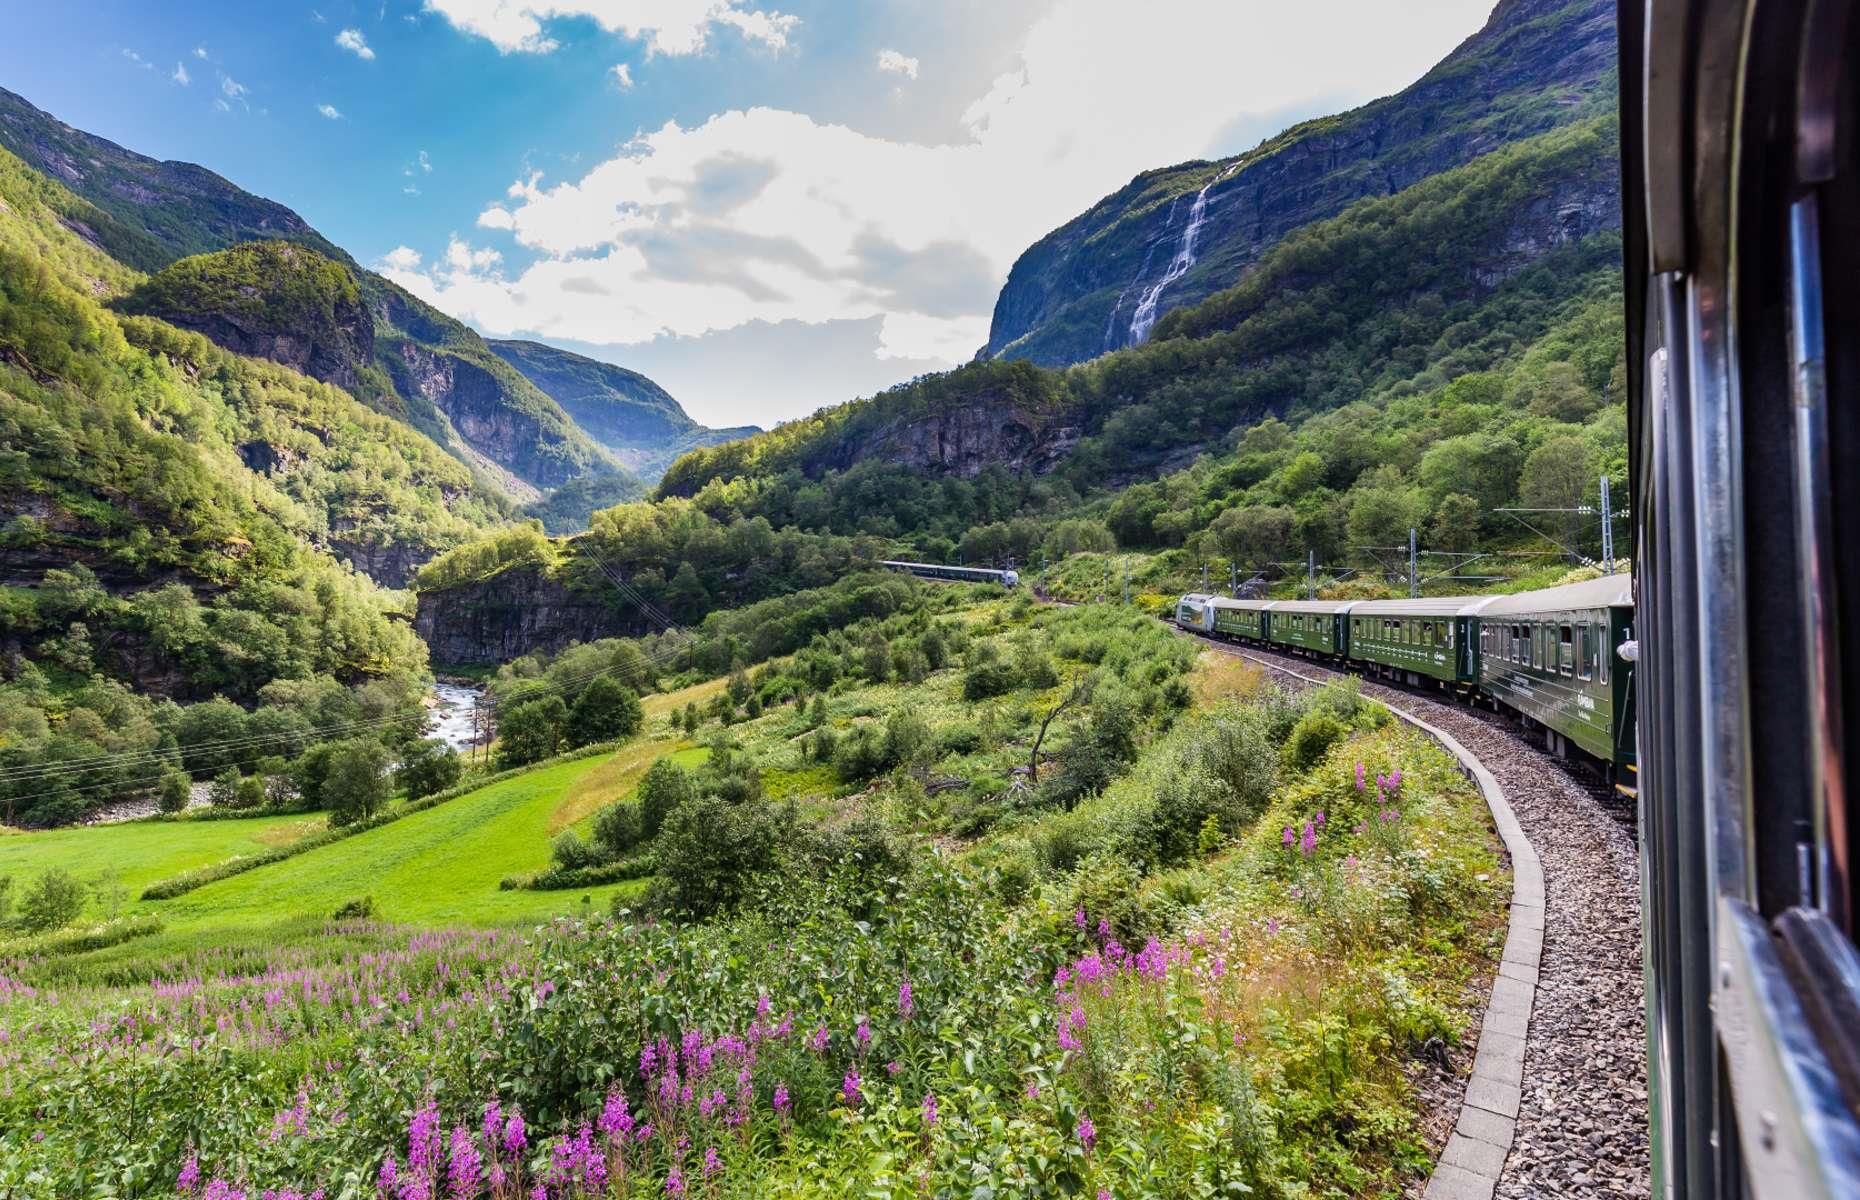 <p>Traveling between Myrdal and Flåm in western Norway, the <a href="https://www.norwaysbest.com/flamsbana/flamsbana---the-flam-railway/">Flåm Railway</a> is among the most historic and beautiful journeys in Europe. The route was built between 1923 and 1940 to serve villages along the Sognefjord. In fact, it’s one of the steepest rail journeys on the planet, dropping 2,844 feet (867m) during its 12-mile (20km) route, with 20 tunnels traveling through the steep mountains. Along the way, you’ll get to see everything from waterfalls to mighty lakes and mountains.</p>